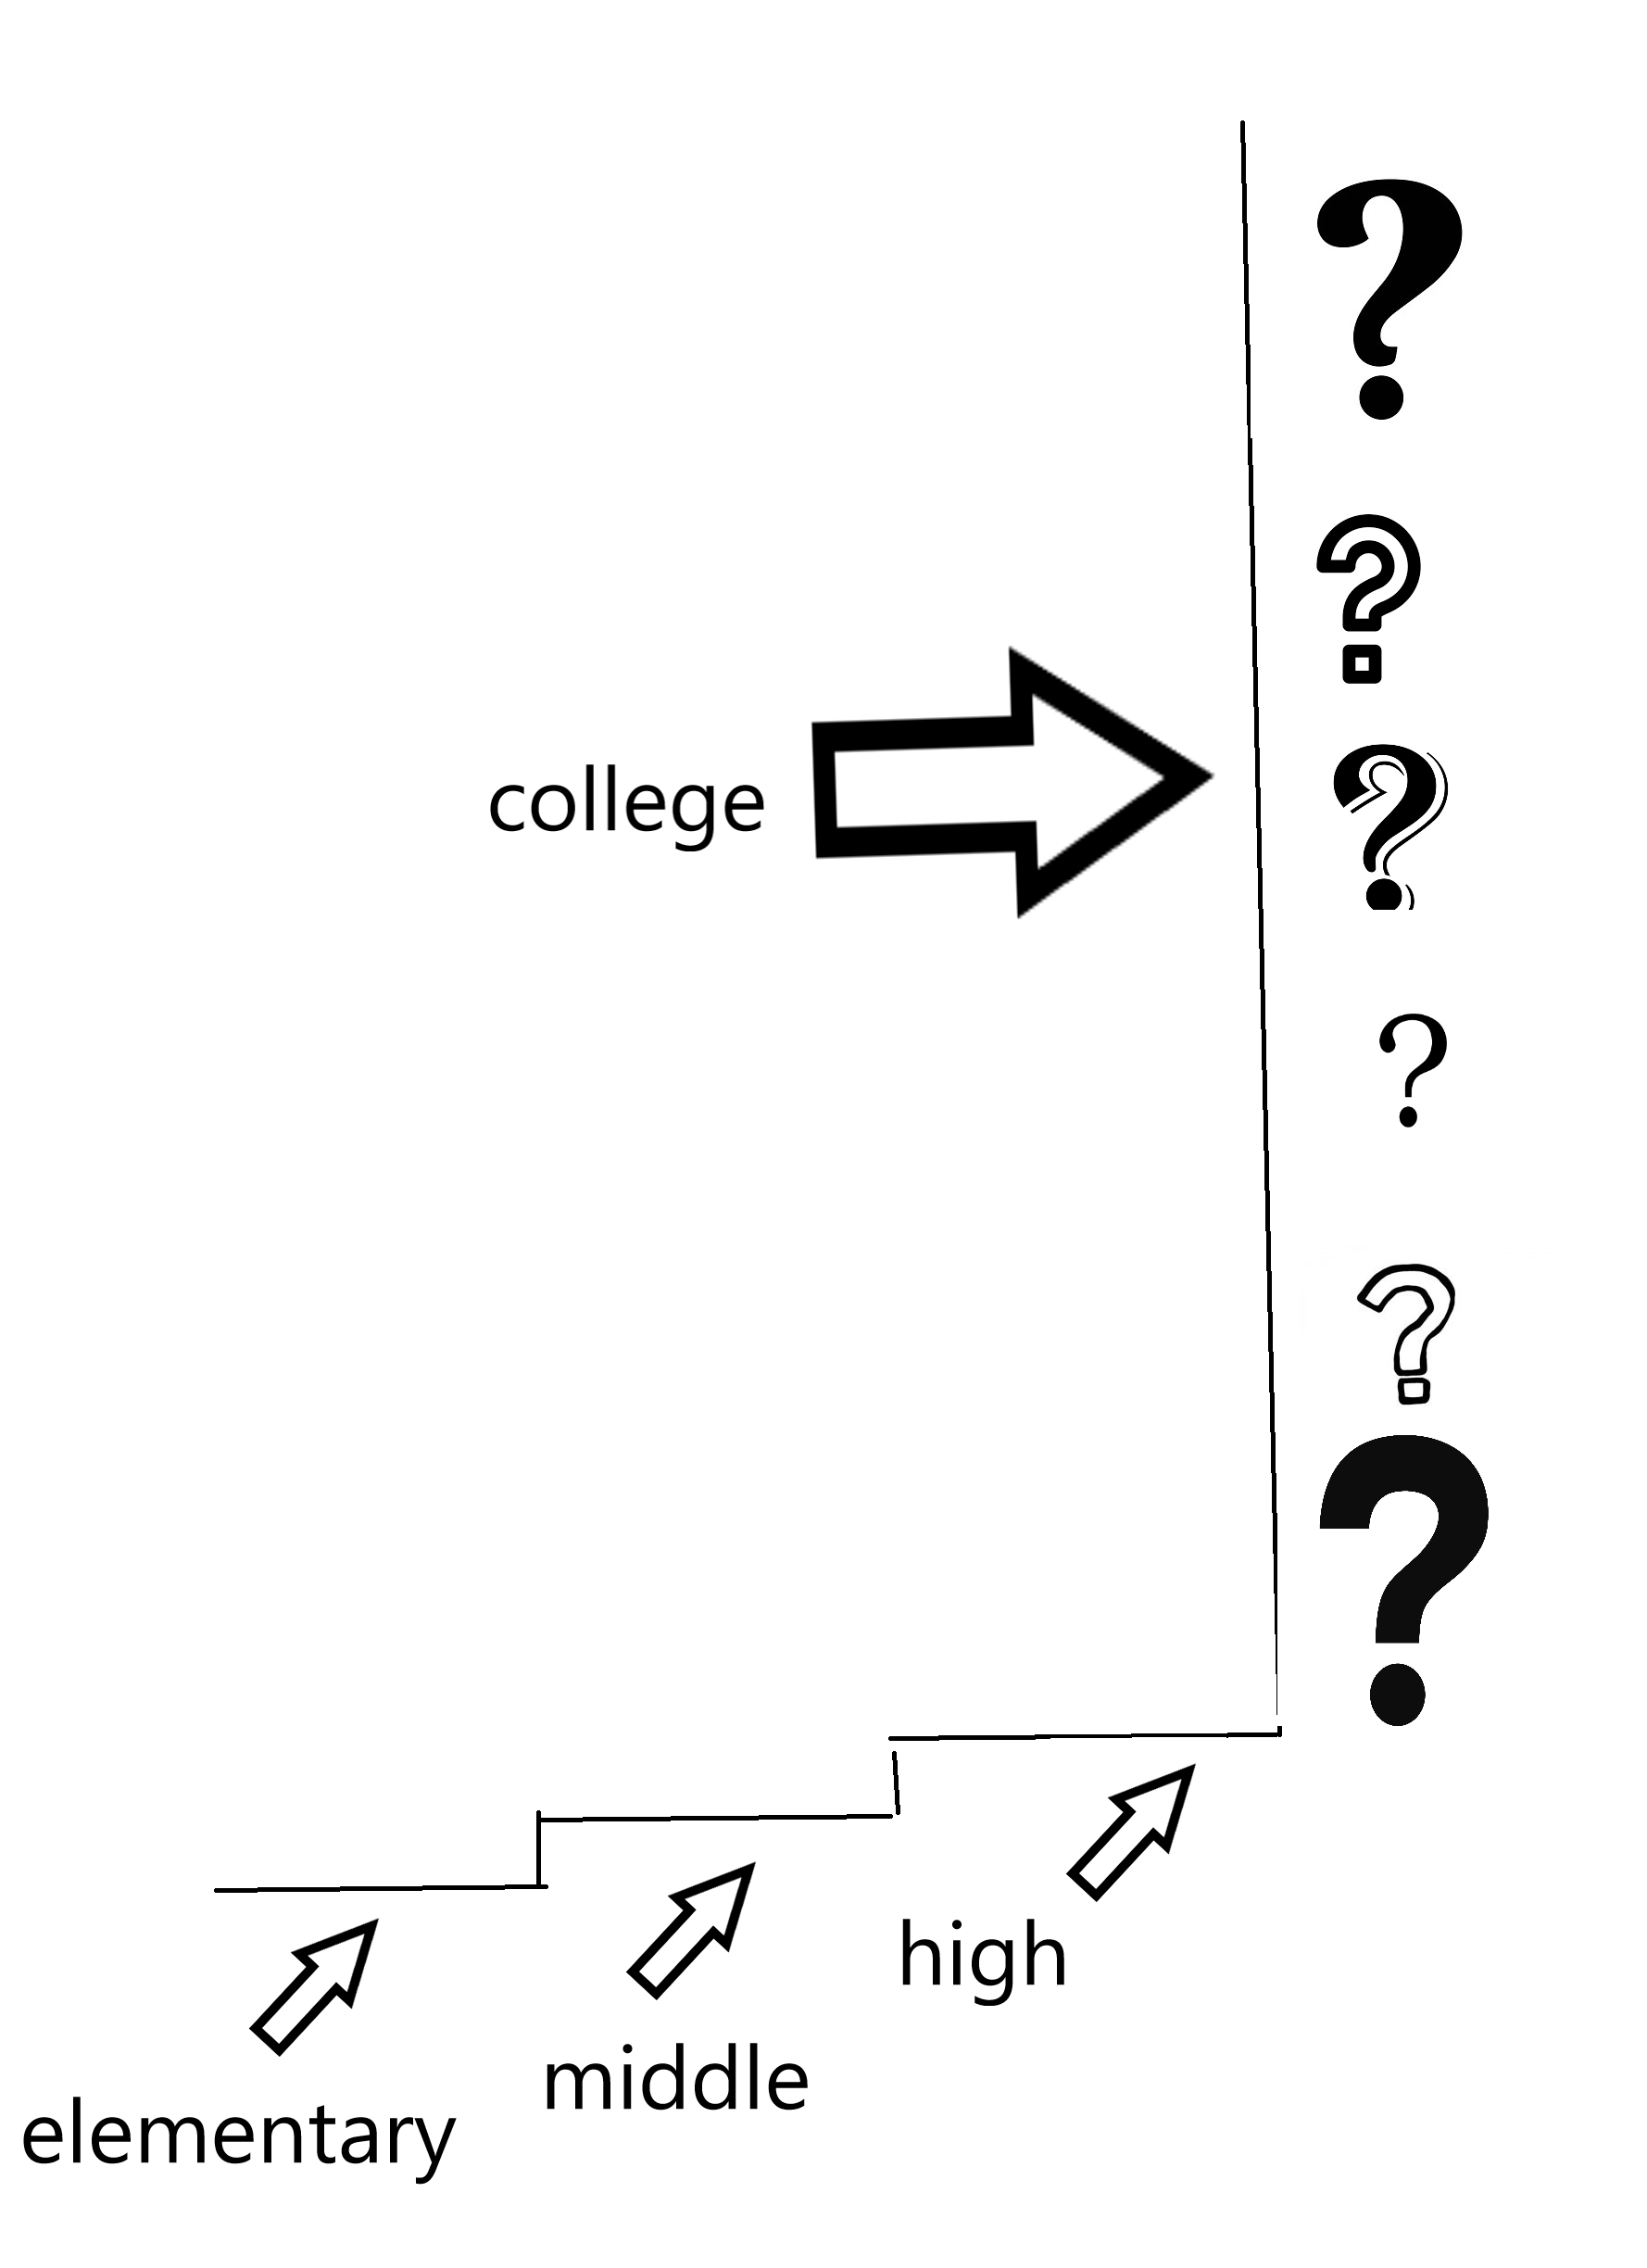 A graphic art of three tiny stair steps labeled elementary, middle, and high. One large step after the three small ones with multiple question marks labeled college.